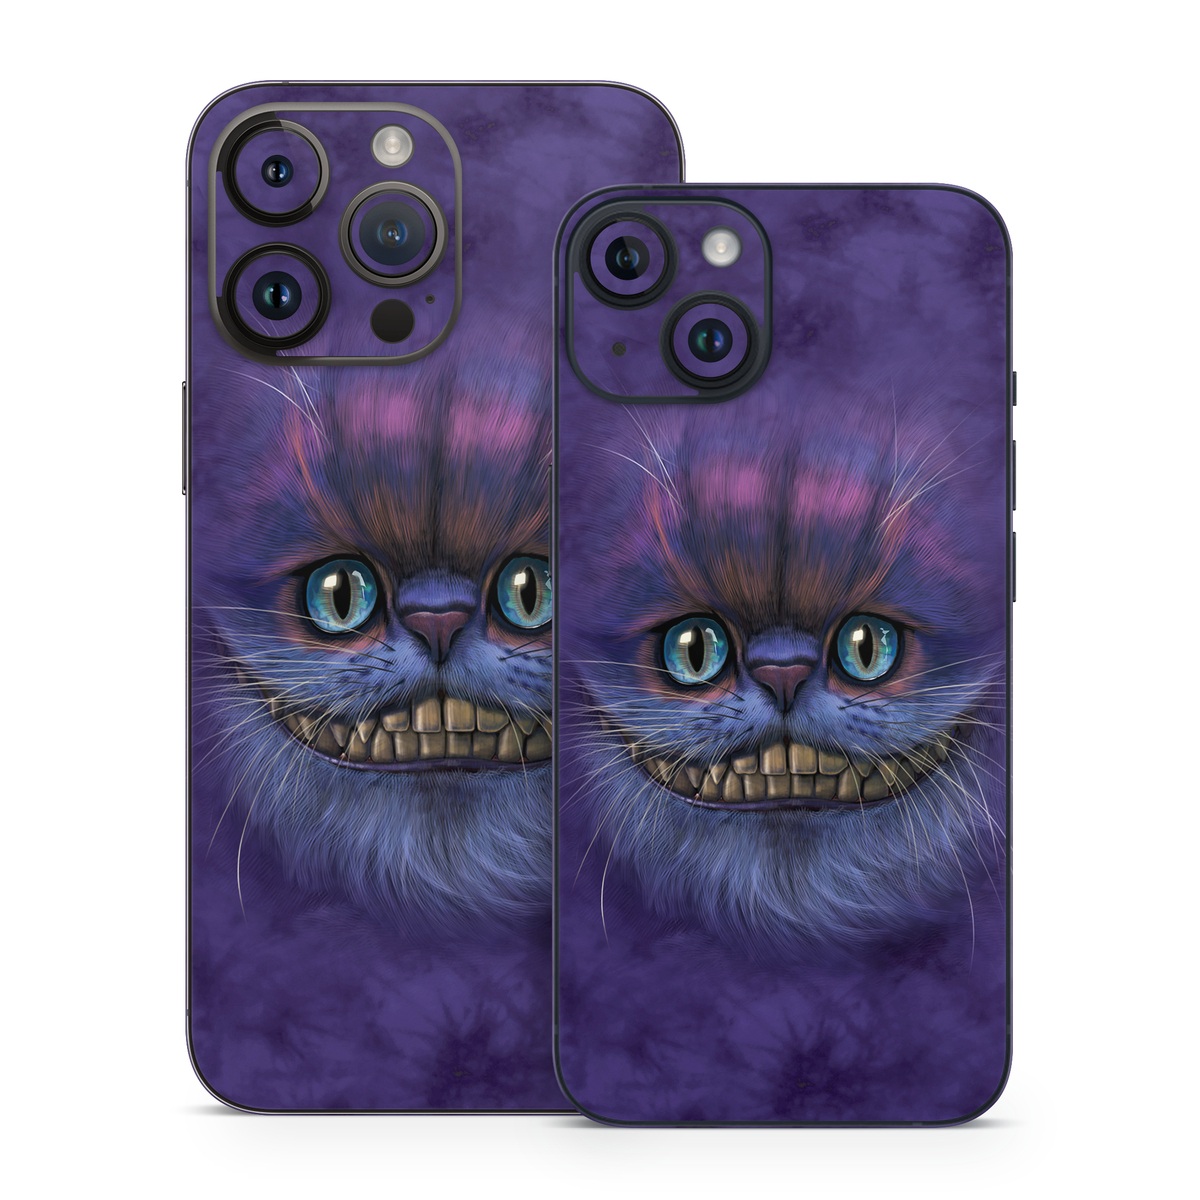 iPhone 14 Skin design of Cat, Whiskers, Felidae, Small to medium-sized cats, Snout, Eye, Illustration, Ojos azules, Black cat, Carnivore, with purple, blue colors